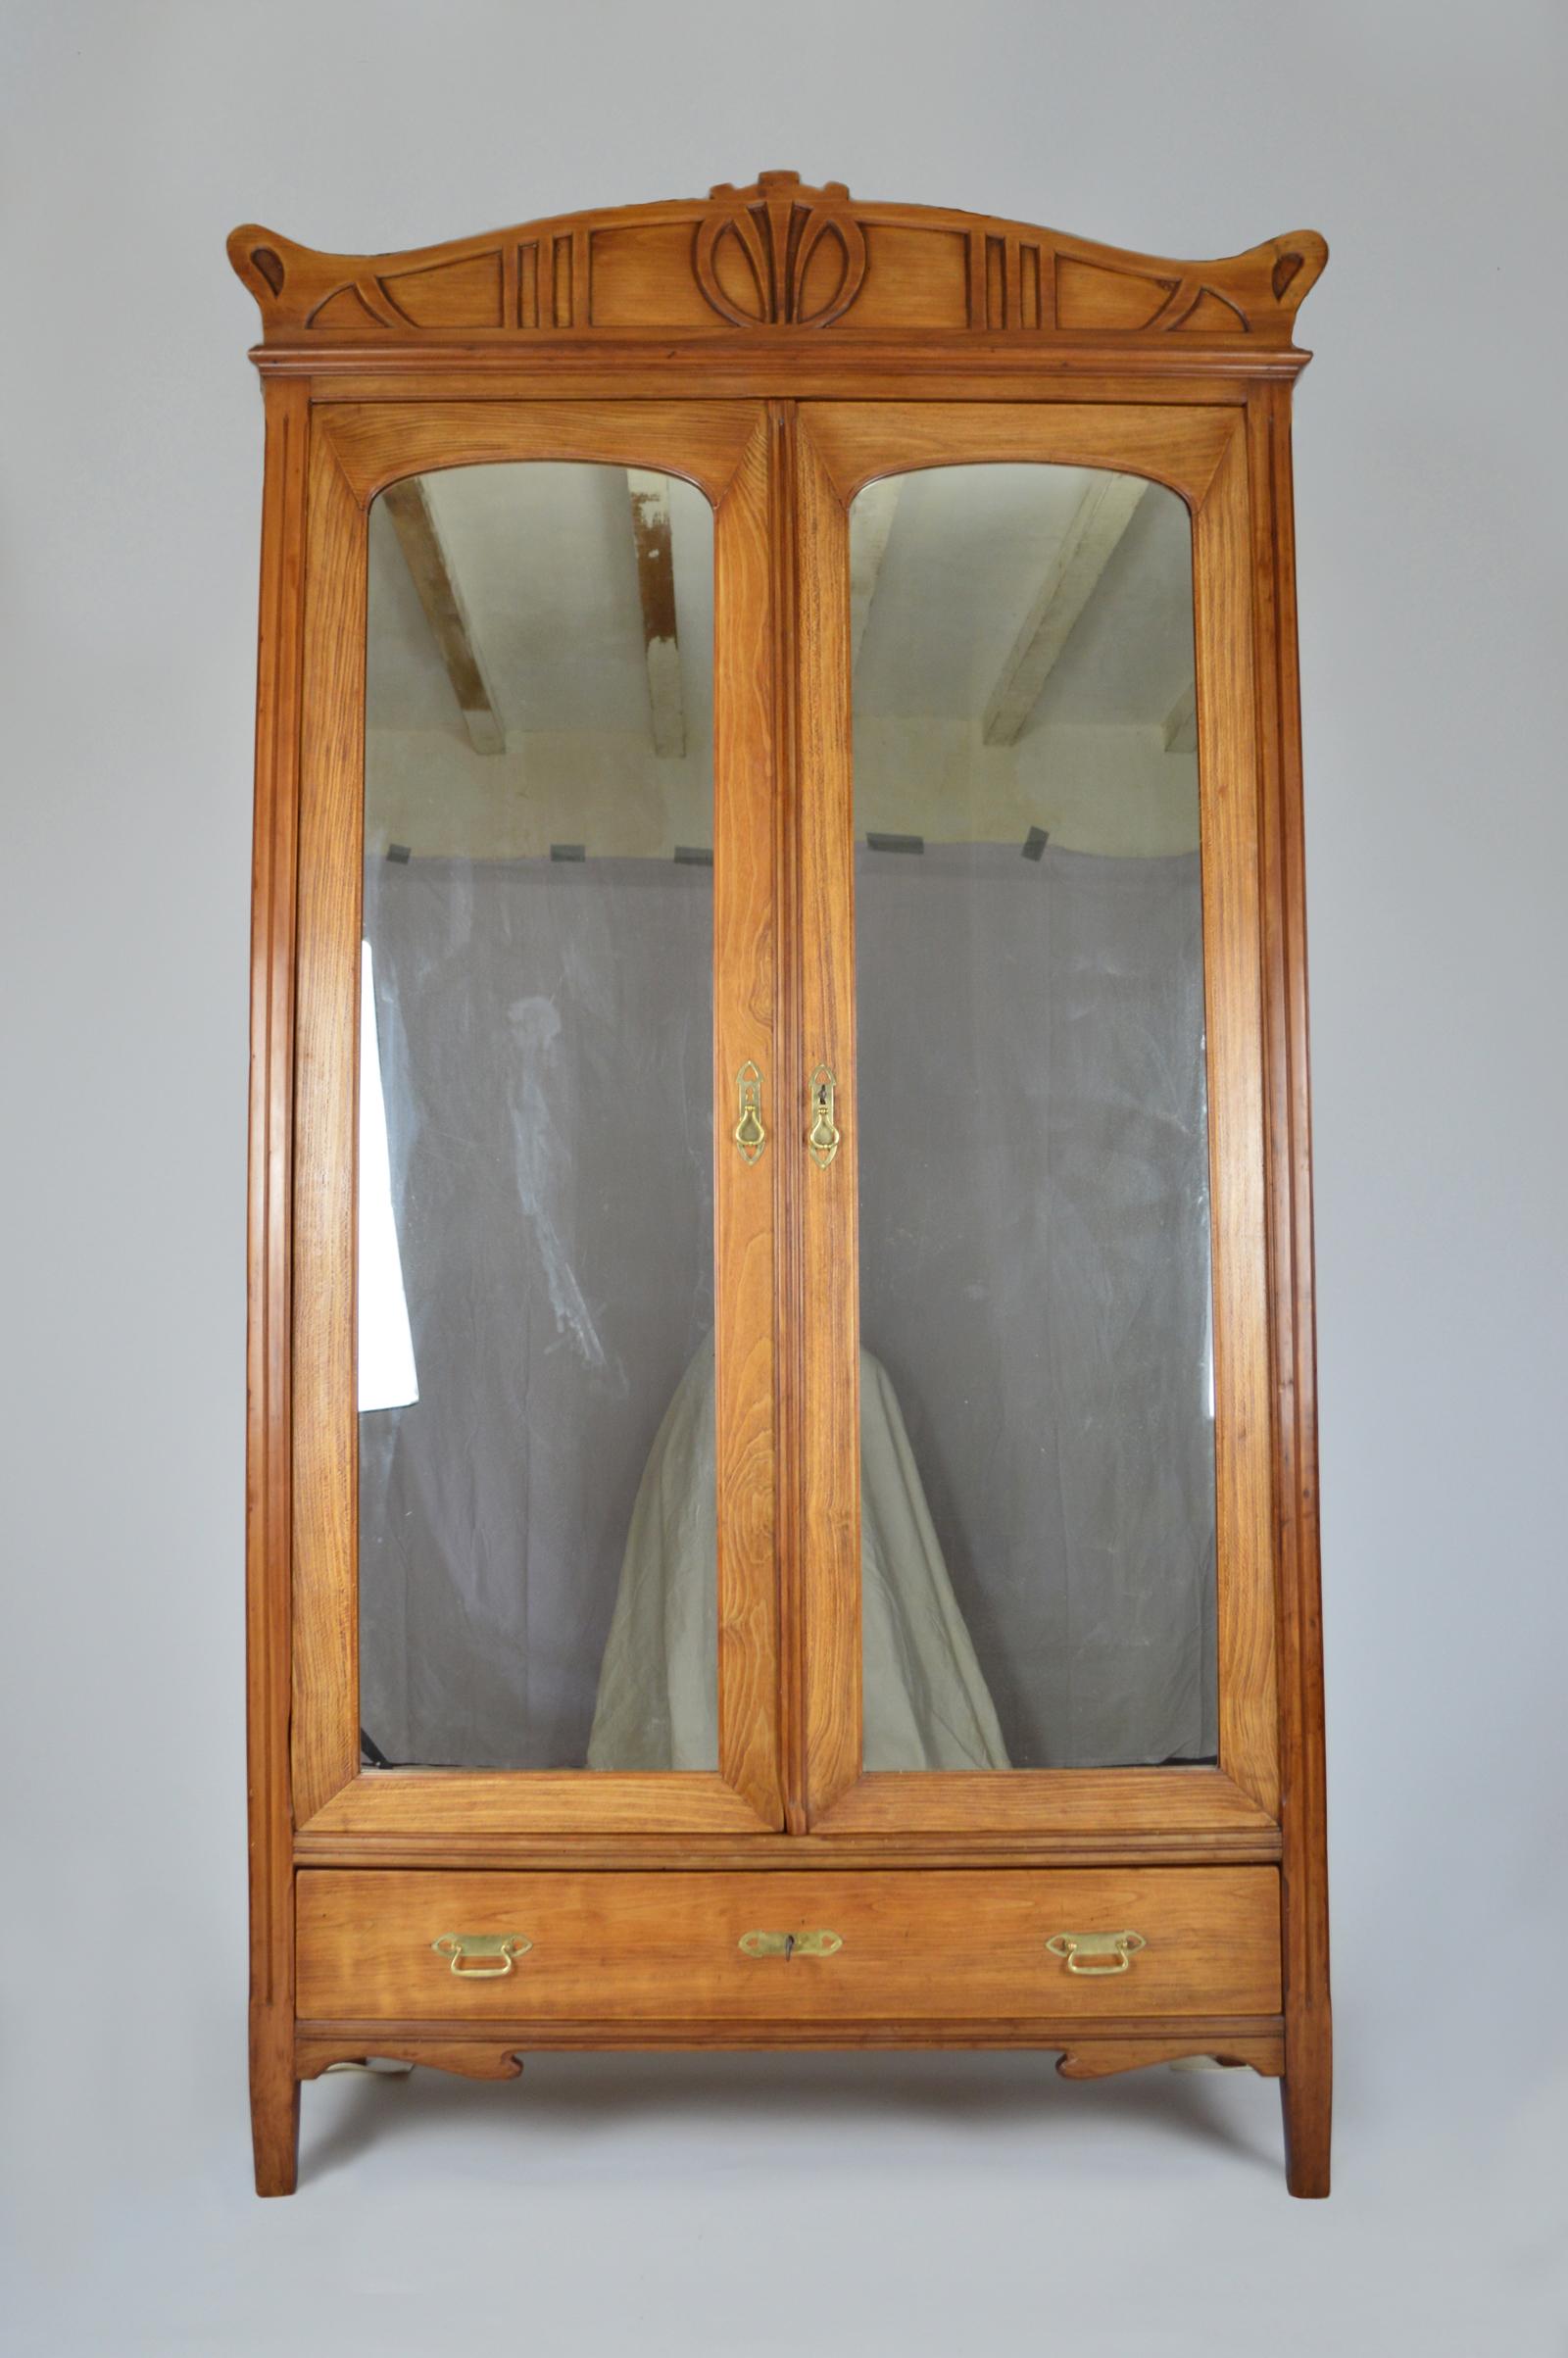 Beautiful Art Nouveau wardrobe.
In light tone carved fruit wood, sorbus or pyrus.
1 closet with 2 mirrored doors containing 1 shelf.
1 drawer.
Handles and keyholes made in brass, heart them.
Keys and locks present, in good working